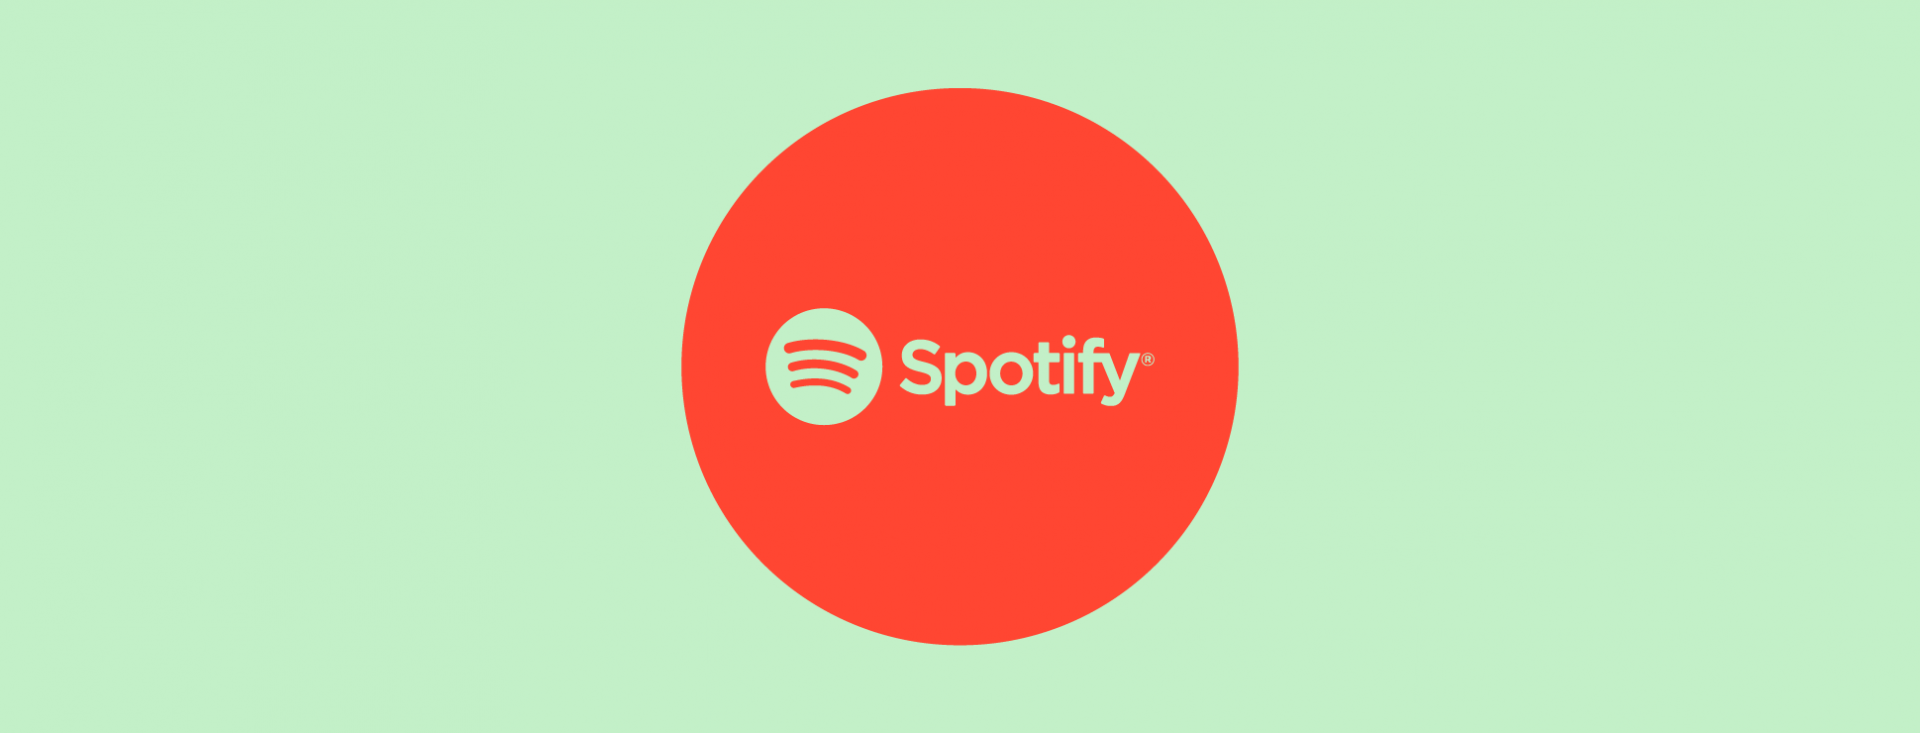 Can I upload songs to Spotify?